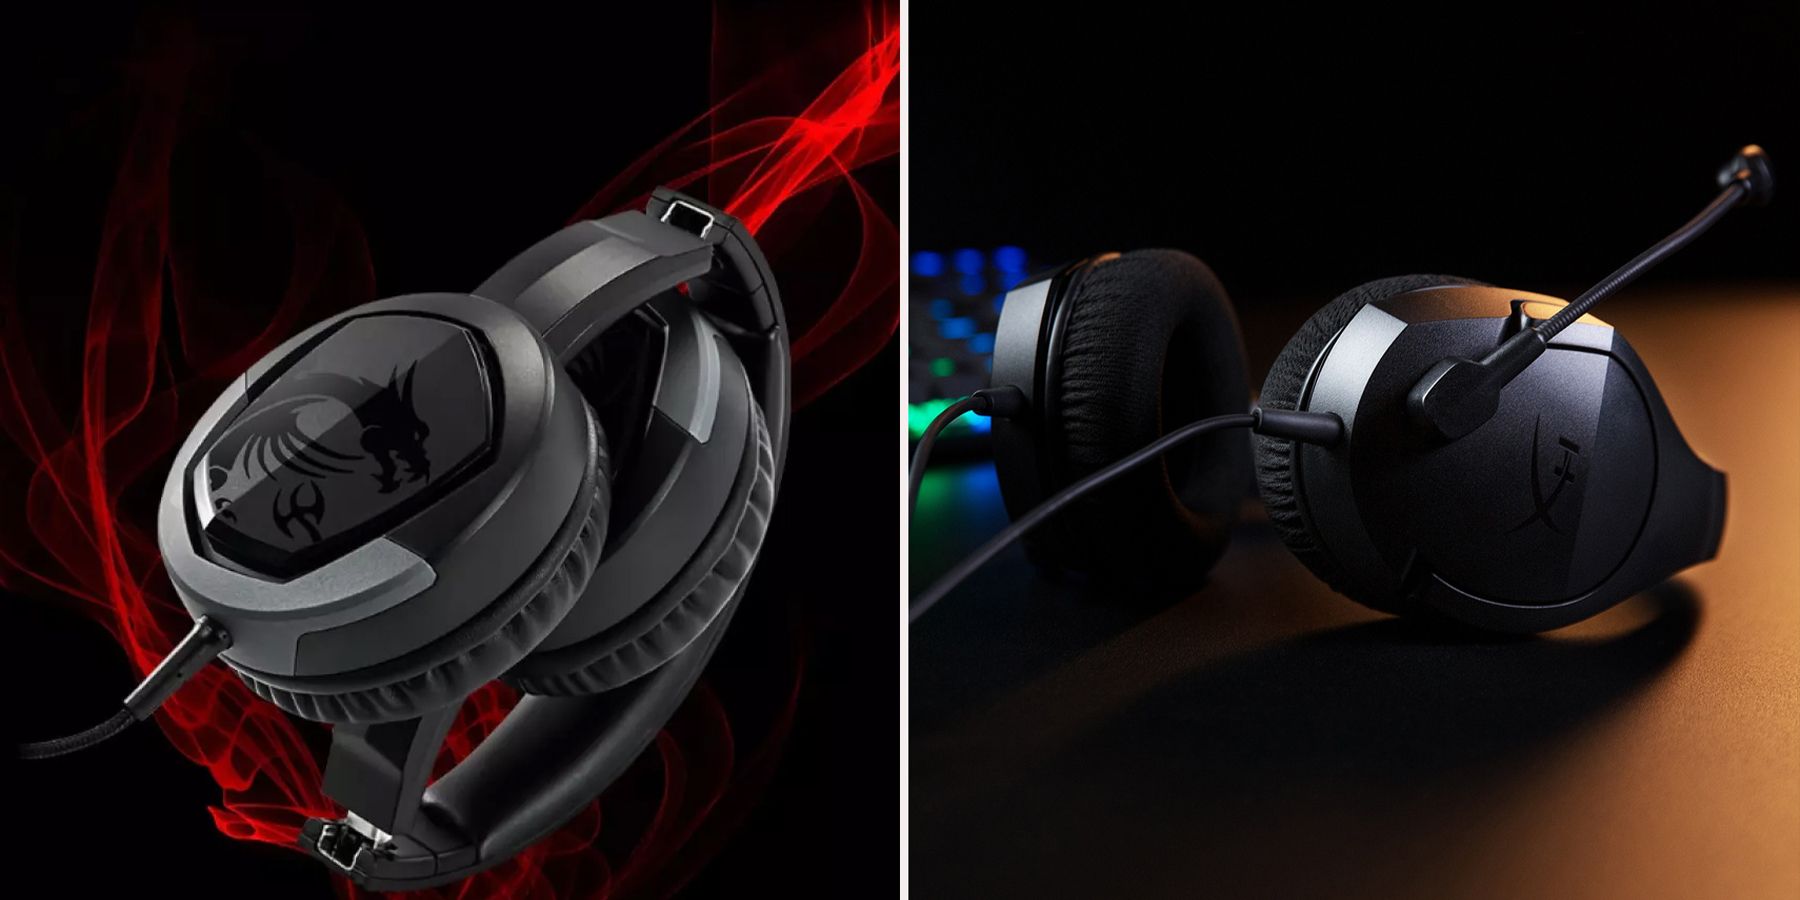 The Best Gaming Headsets For Under $30 featured image